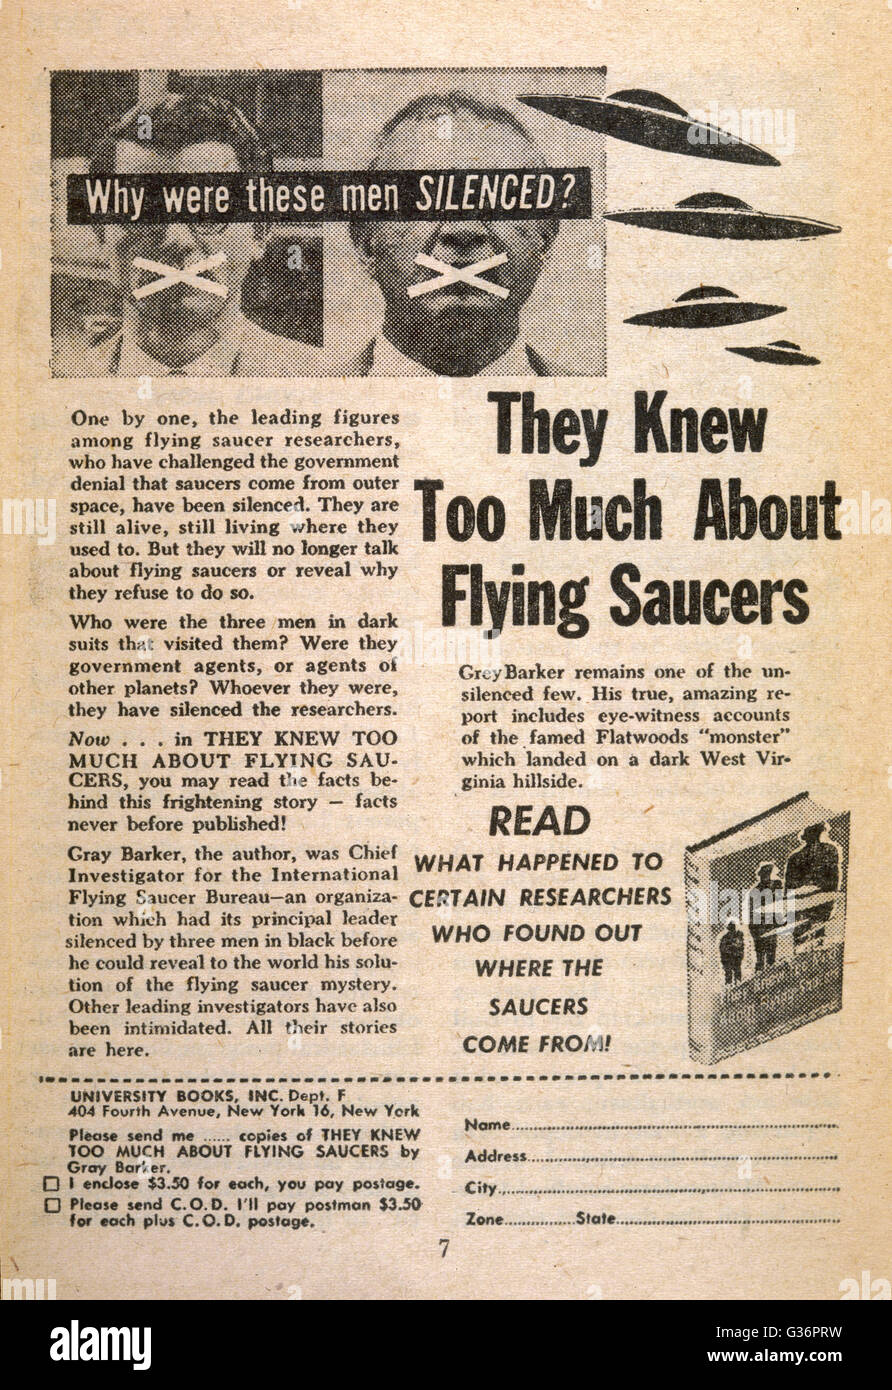 An advertisement for a book by Gray Barker, They Knew Too Much About Flying Saucers, suggesting cover-ups, conspiracy and paranoia surrounding UFO sightings.      Date: 1956 Stock Photo